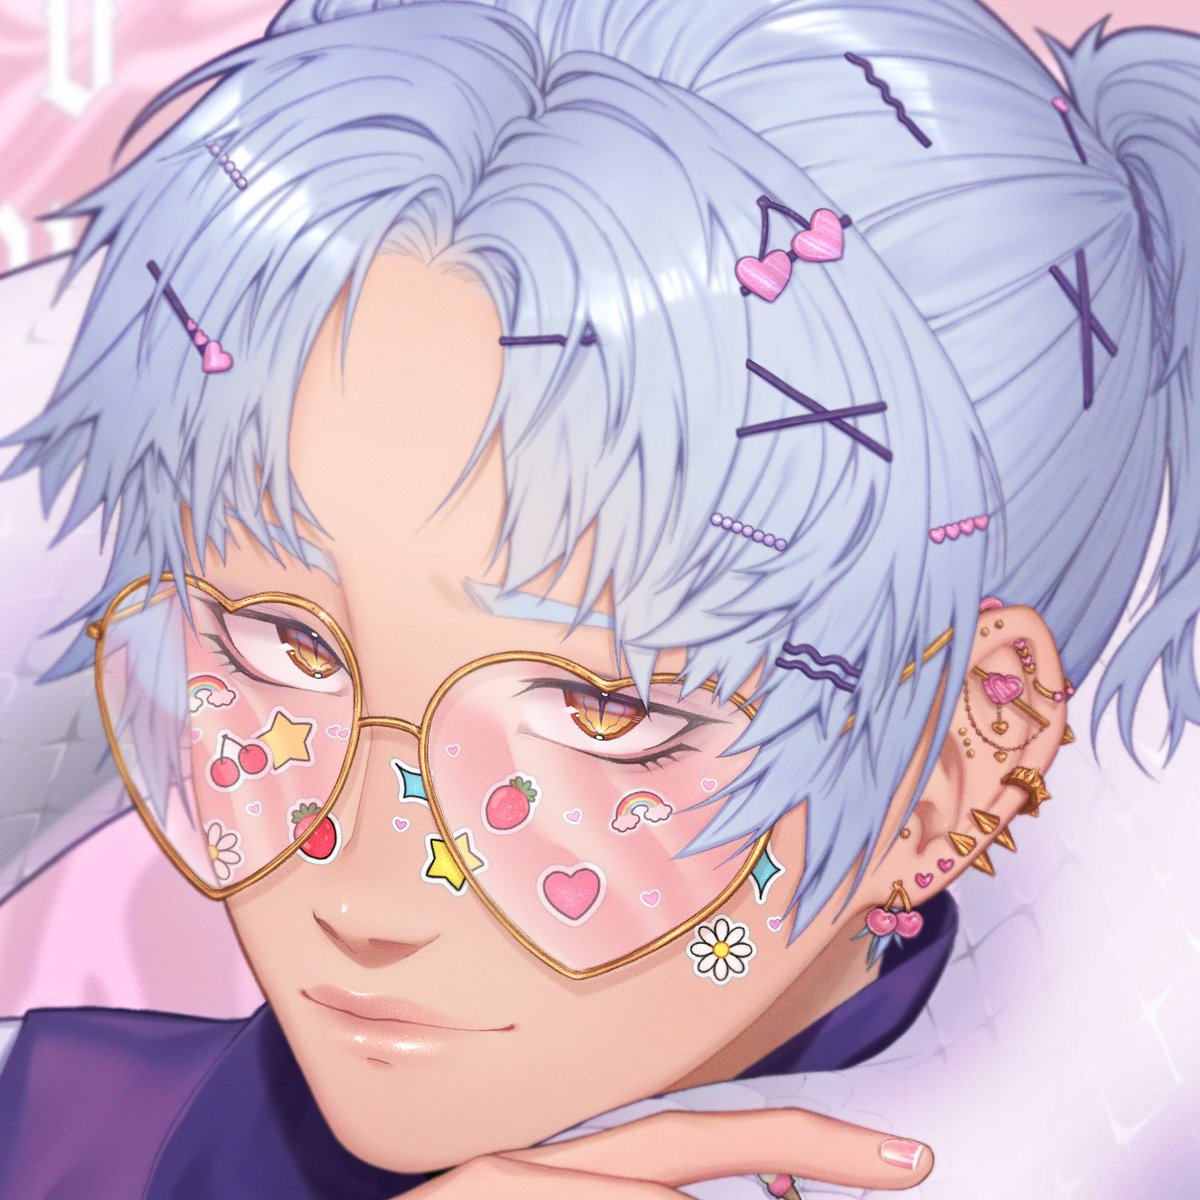 「Please rt if you see this I spent foreve」|🍑 𝖓𝖎𝖈𝖔𝖑𝖑𝖔 🍑 coms open!のイラスト